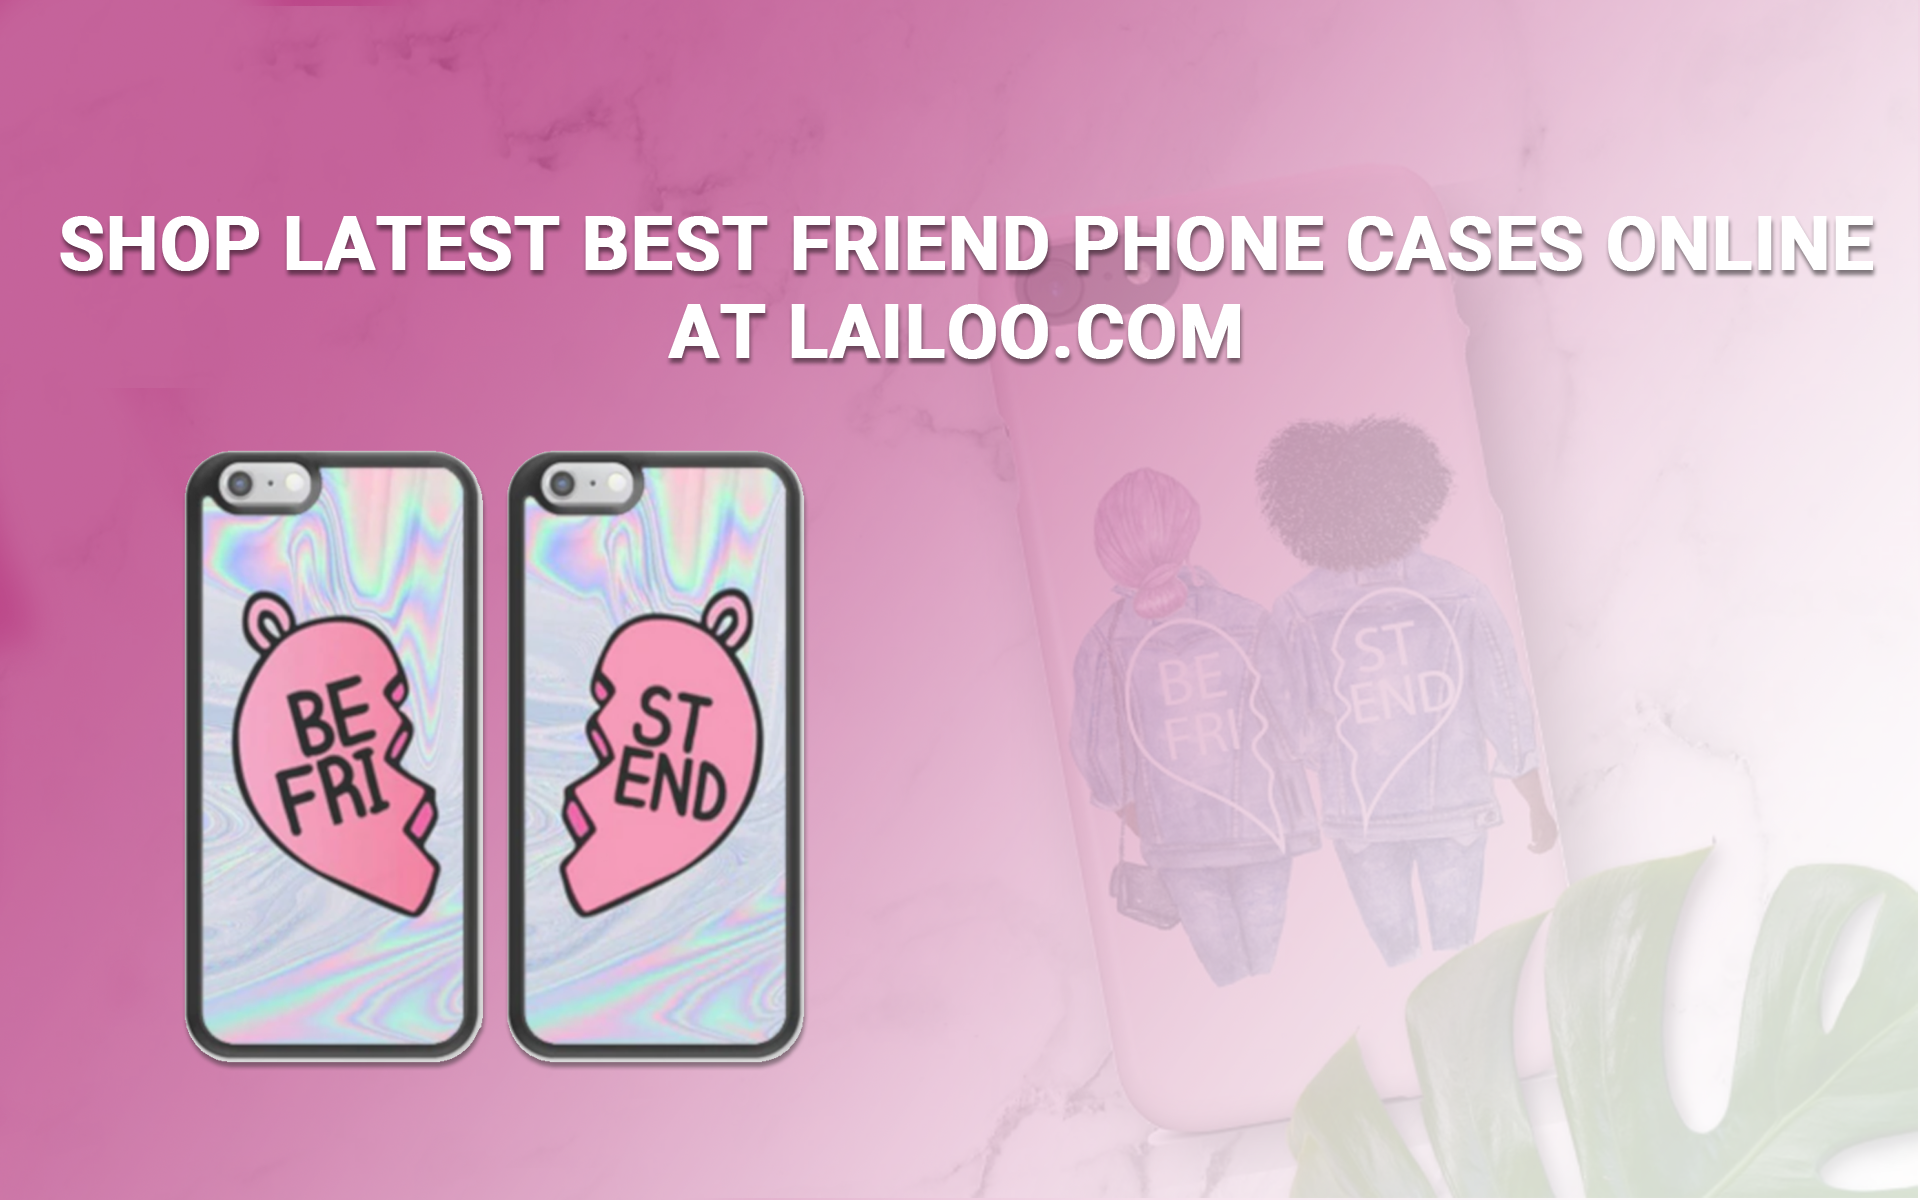 Different designs of Best friend phone cases